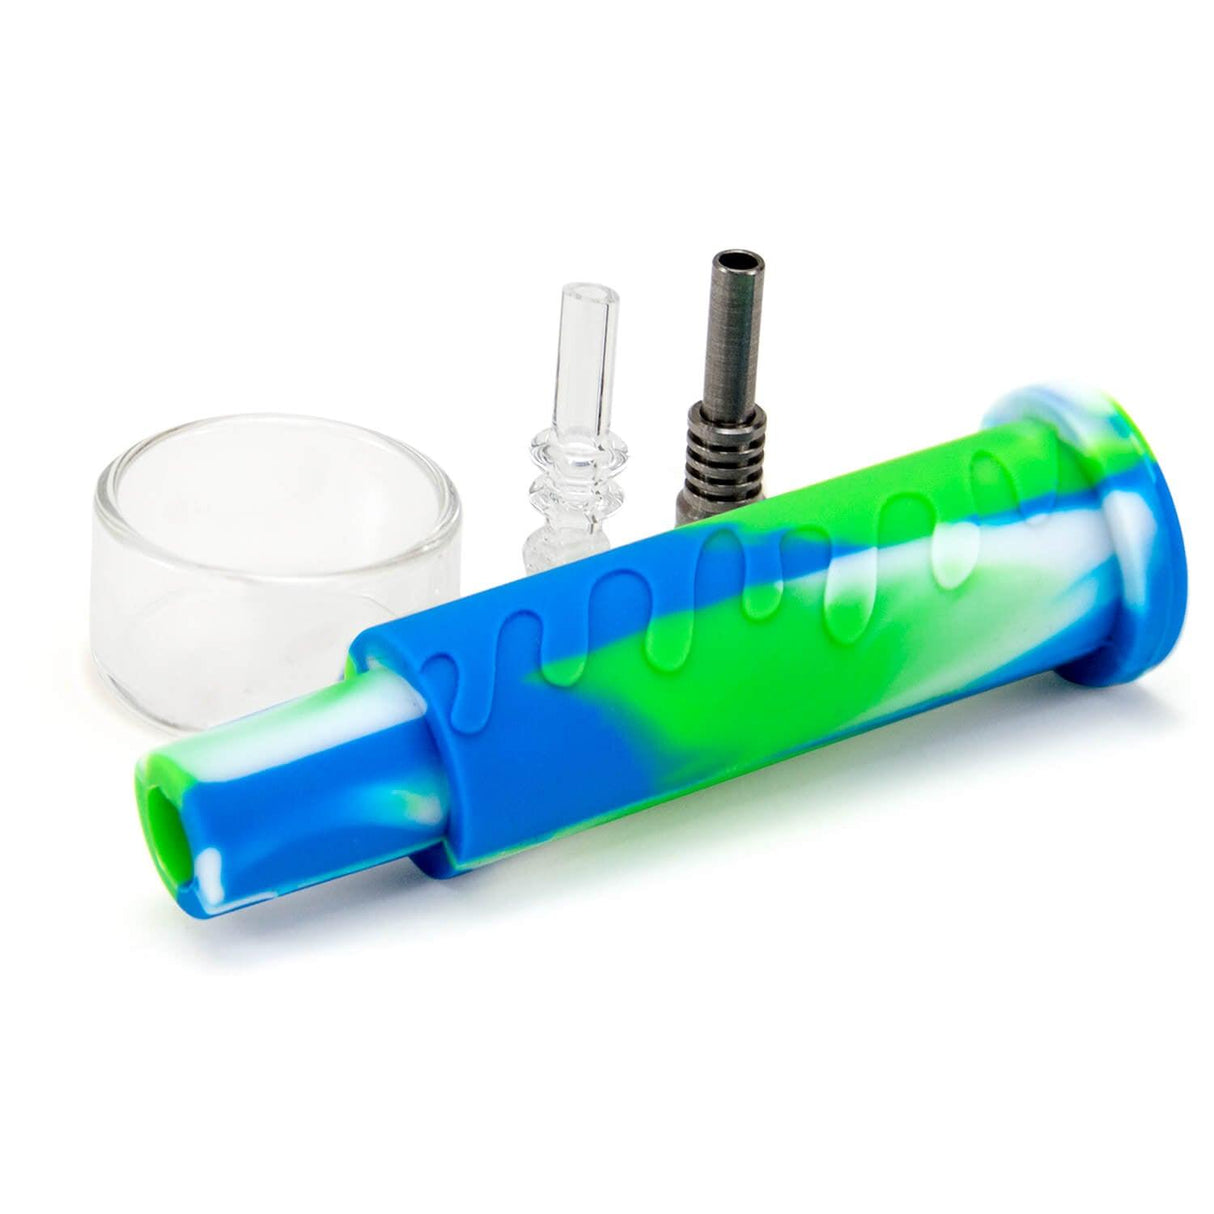 PILOT DIARY Honey Straw Nectar Collector Kit with Glass Dish - Angled Side View